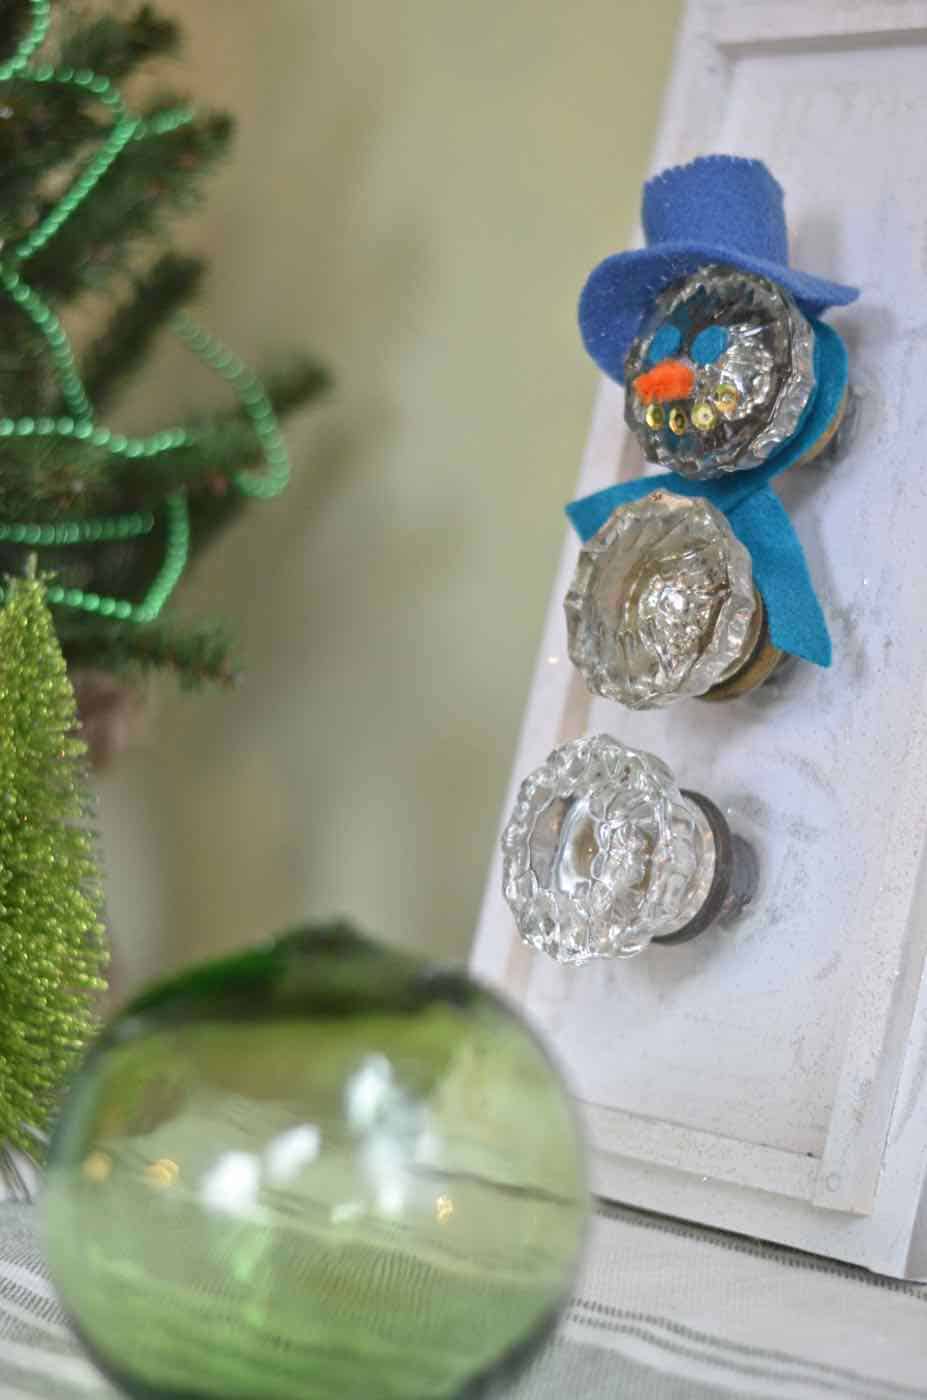 Transform thrifted glass doorknobs into repurposed Christmas snowman.